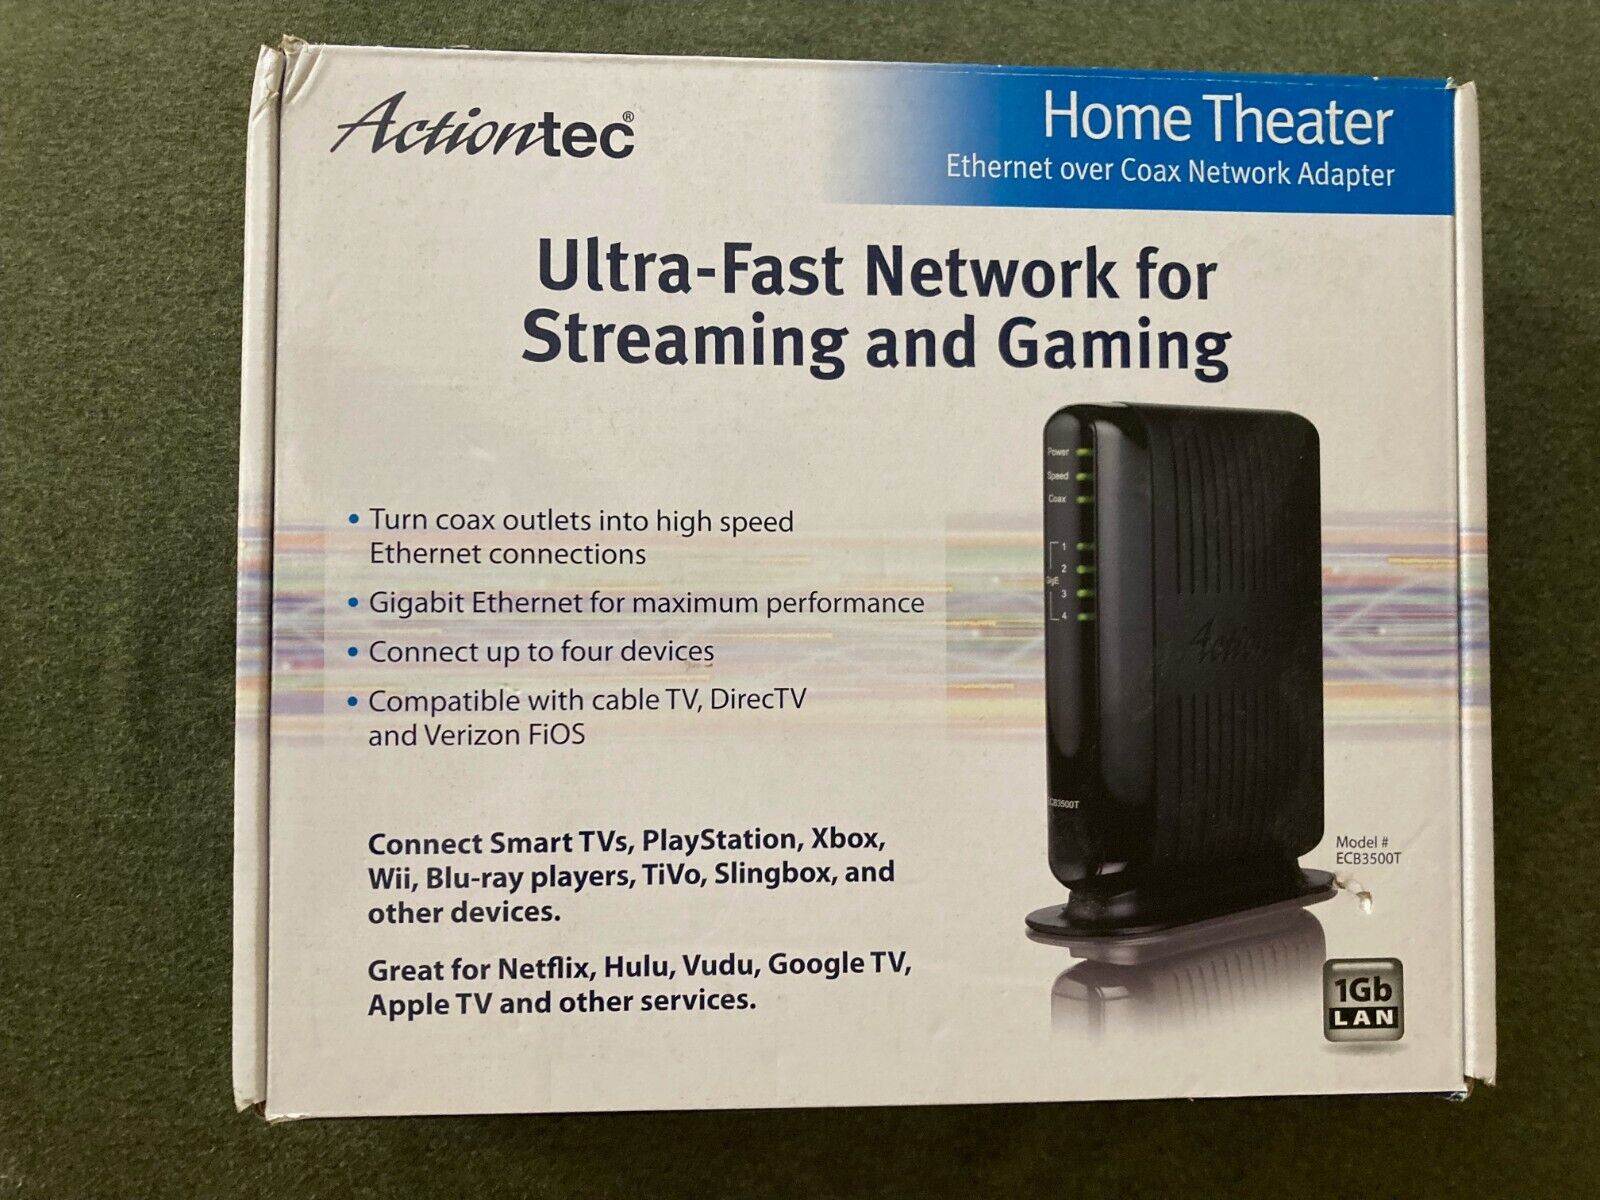 Actiontec Ecb2500c Ethernet Over Coax Adapter For Homes W/ Moca Routers